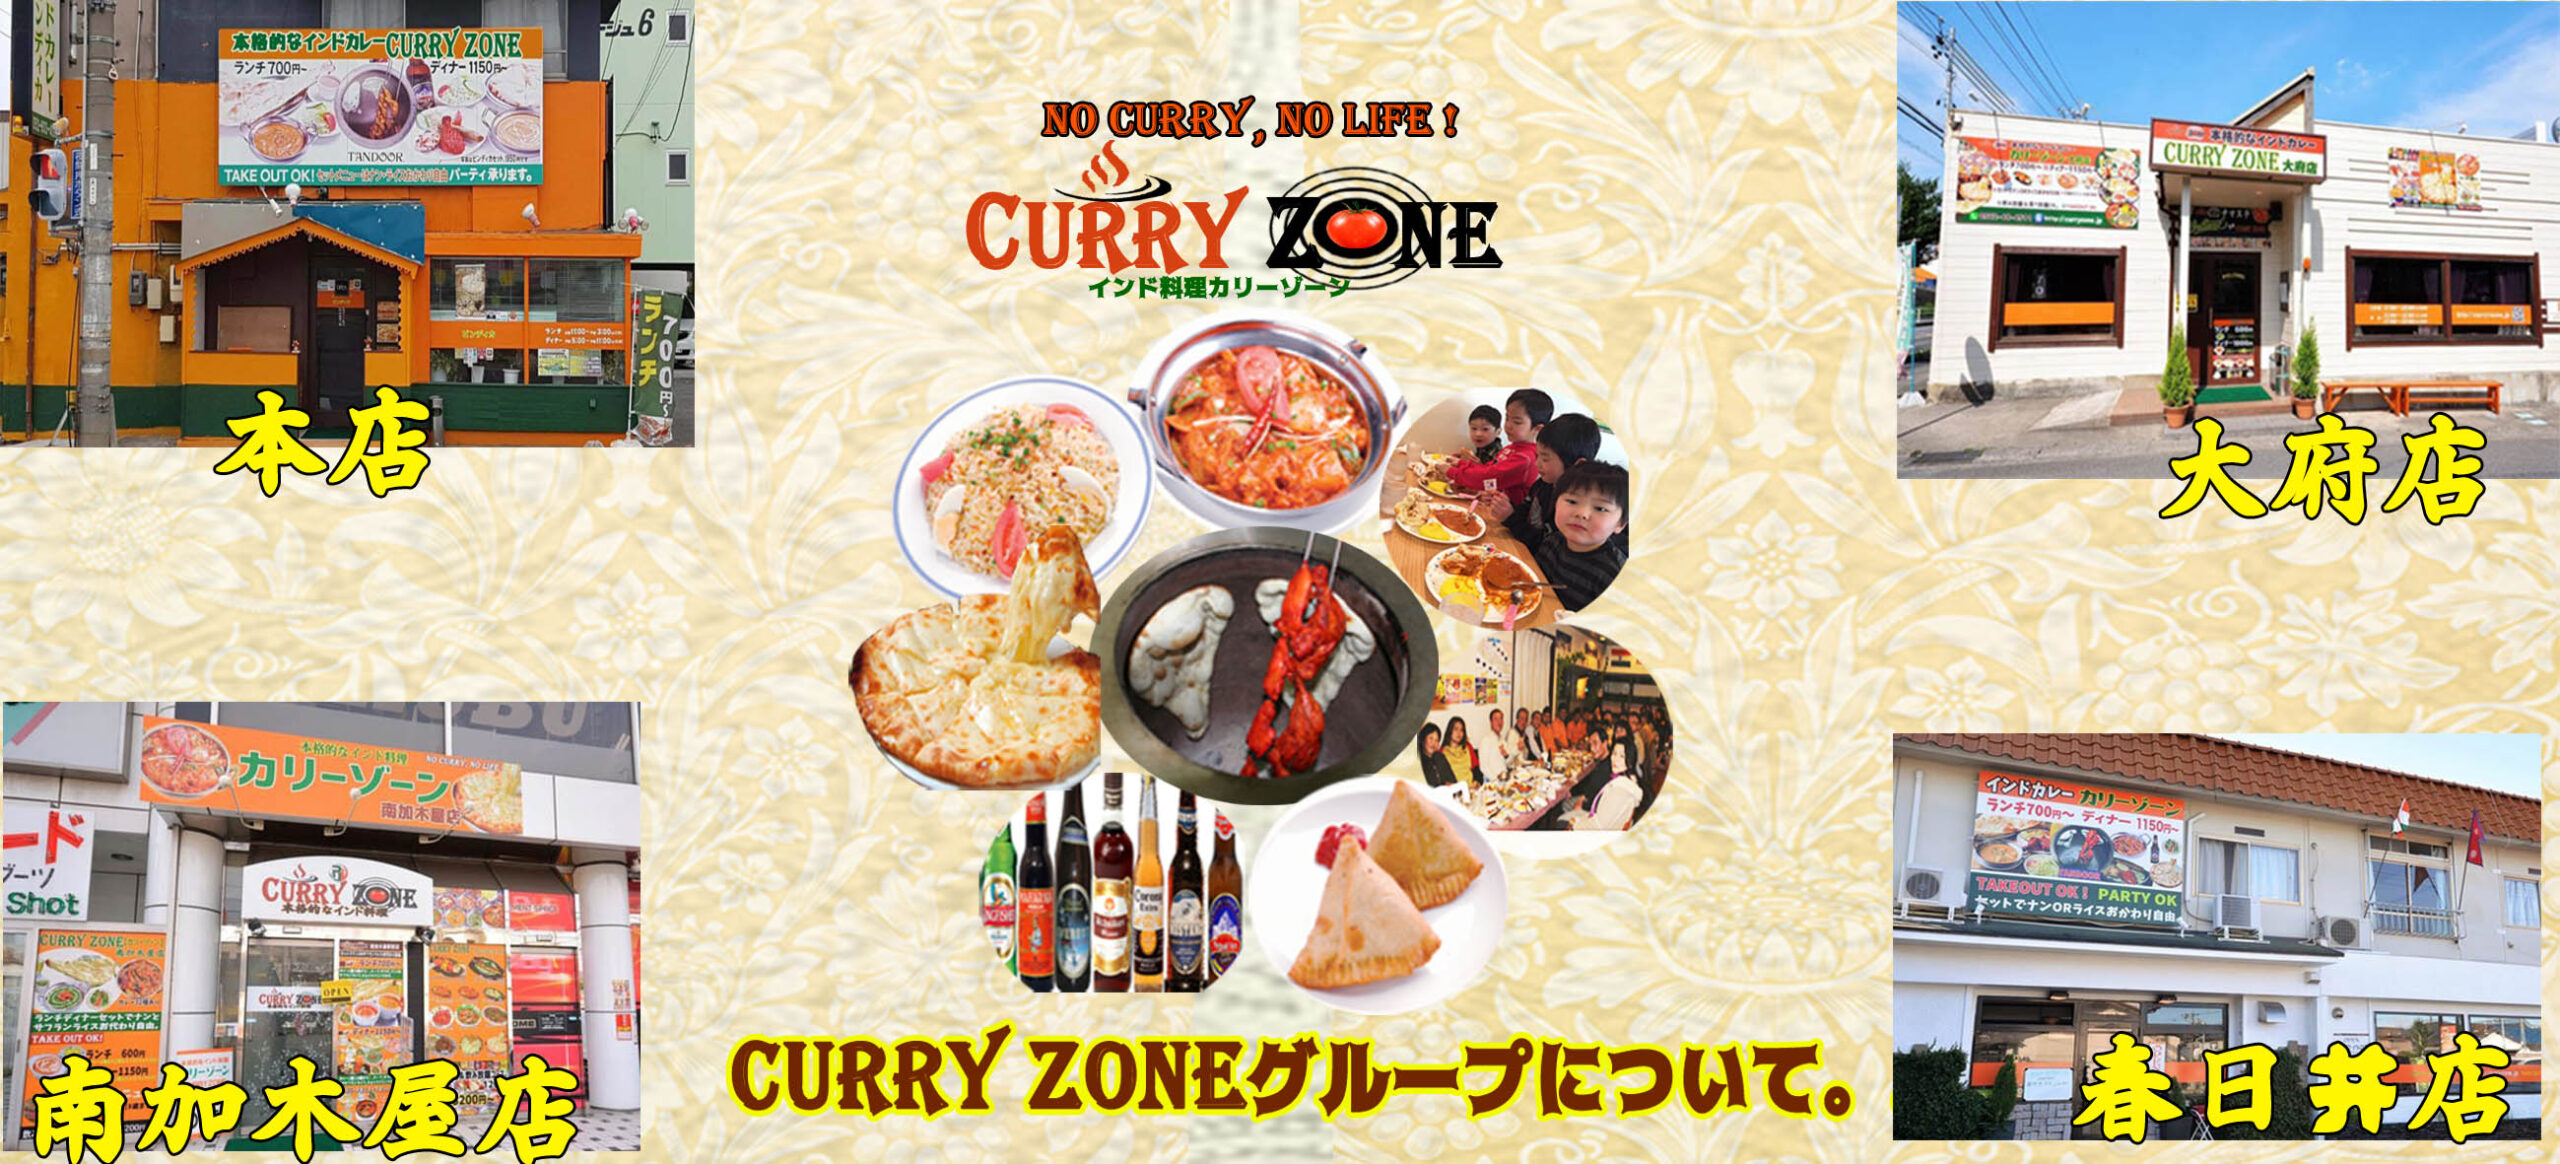 About  Curry Zone